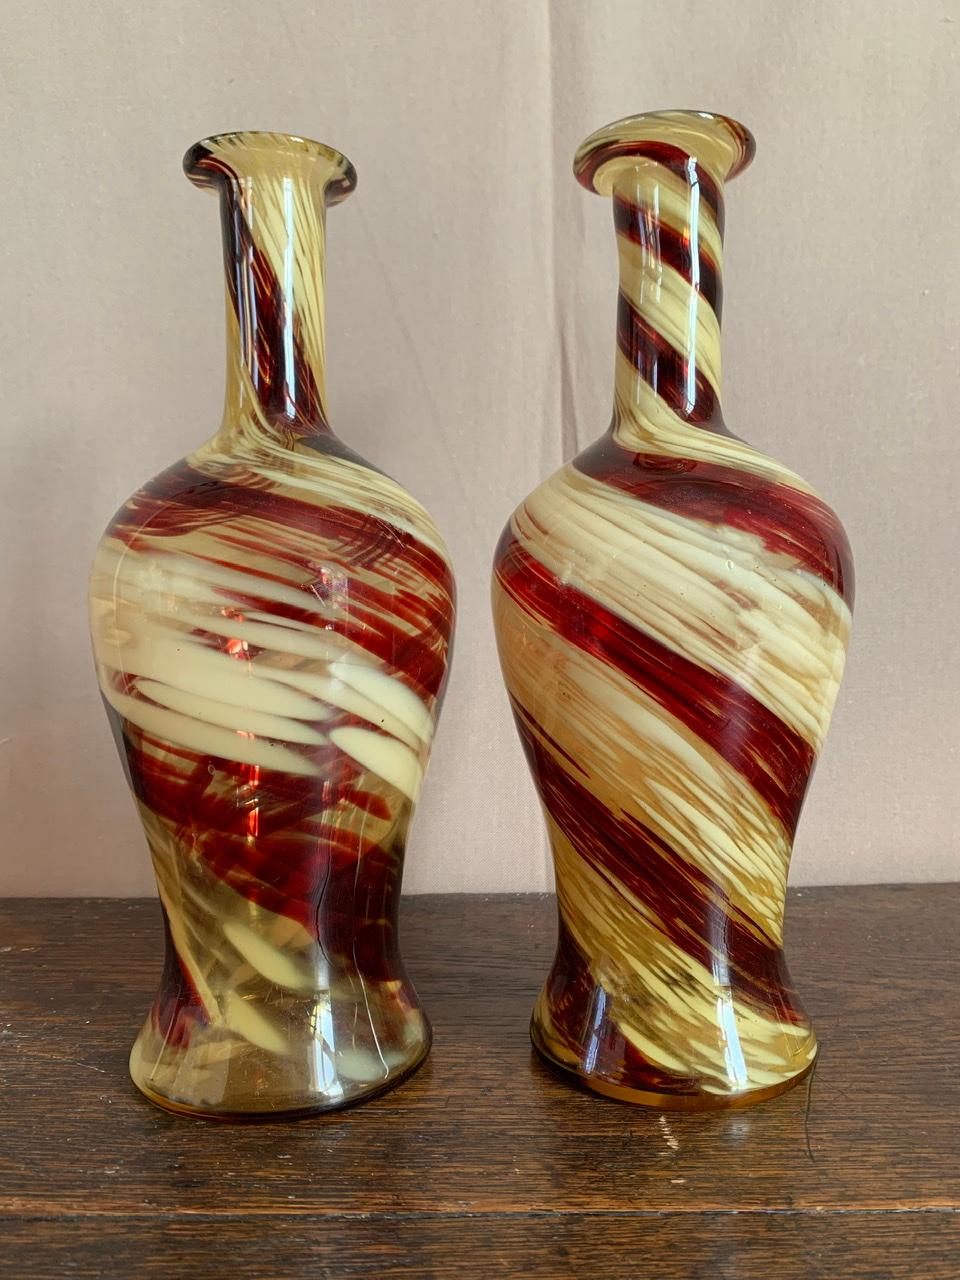 Charming pair of bottle vases in the taste of Murano production. They are both translucent and have a red and white spiral pattern. Because of their bottle shape they can also be used as a carafe.